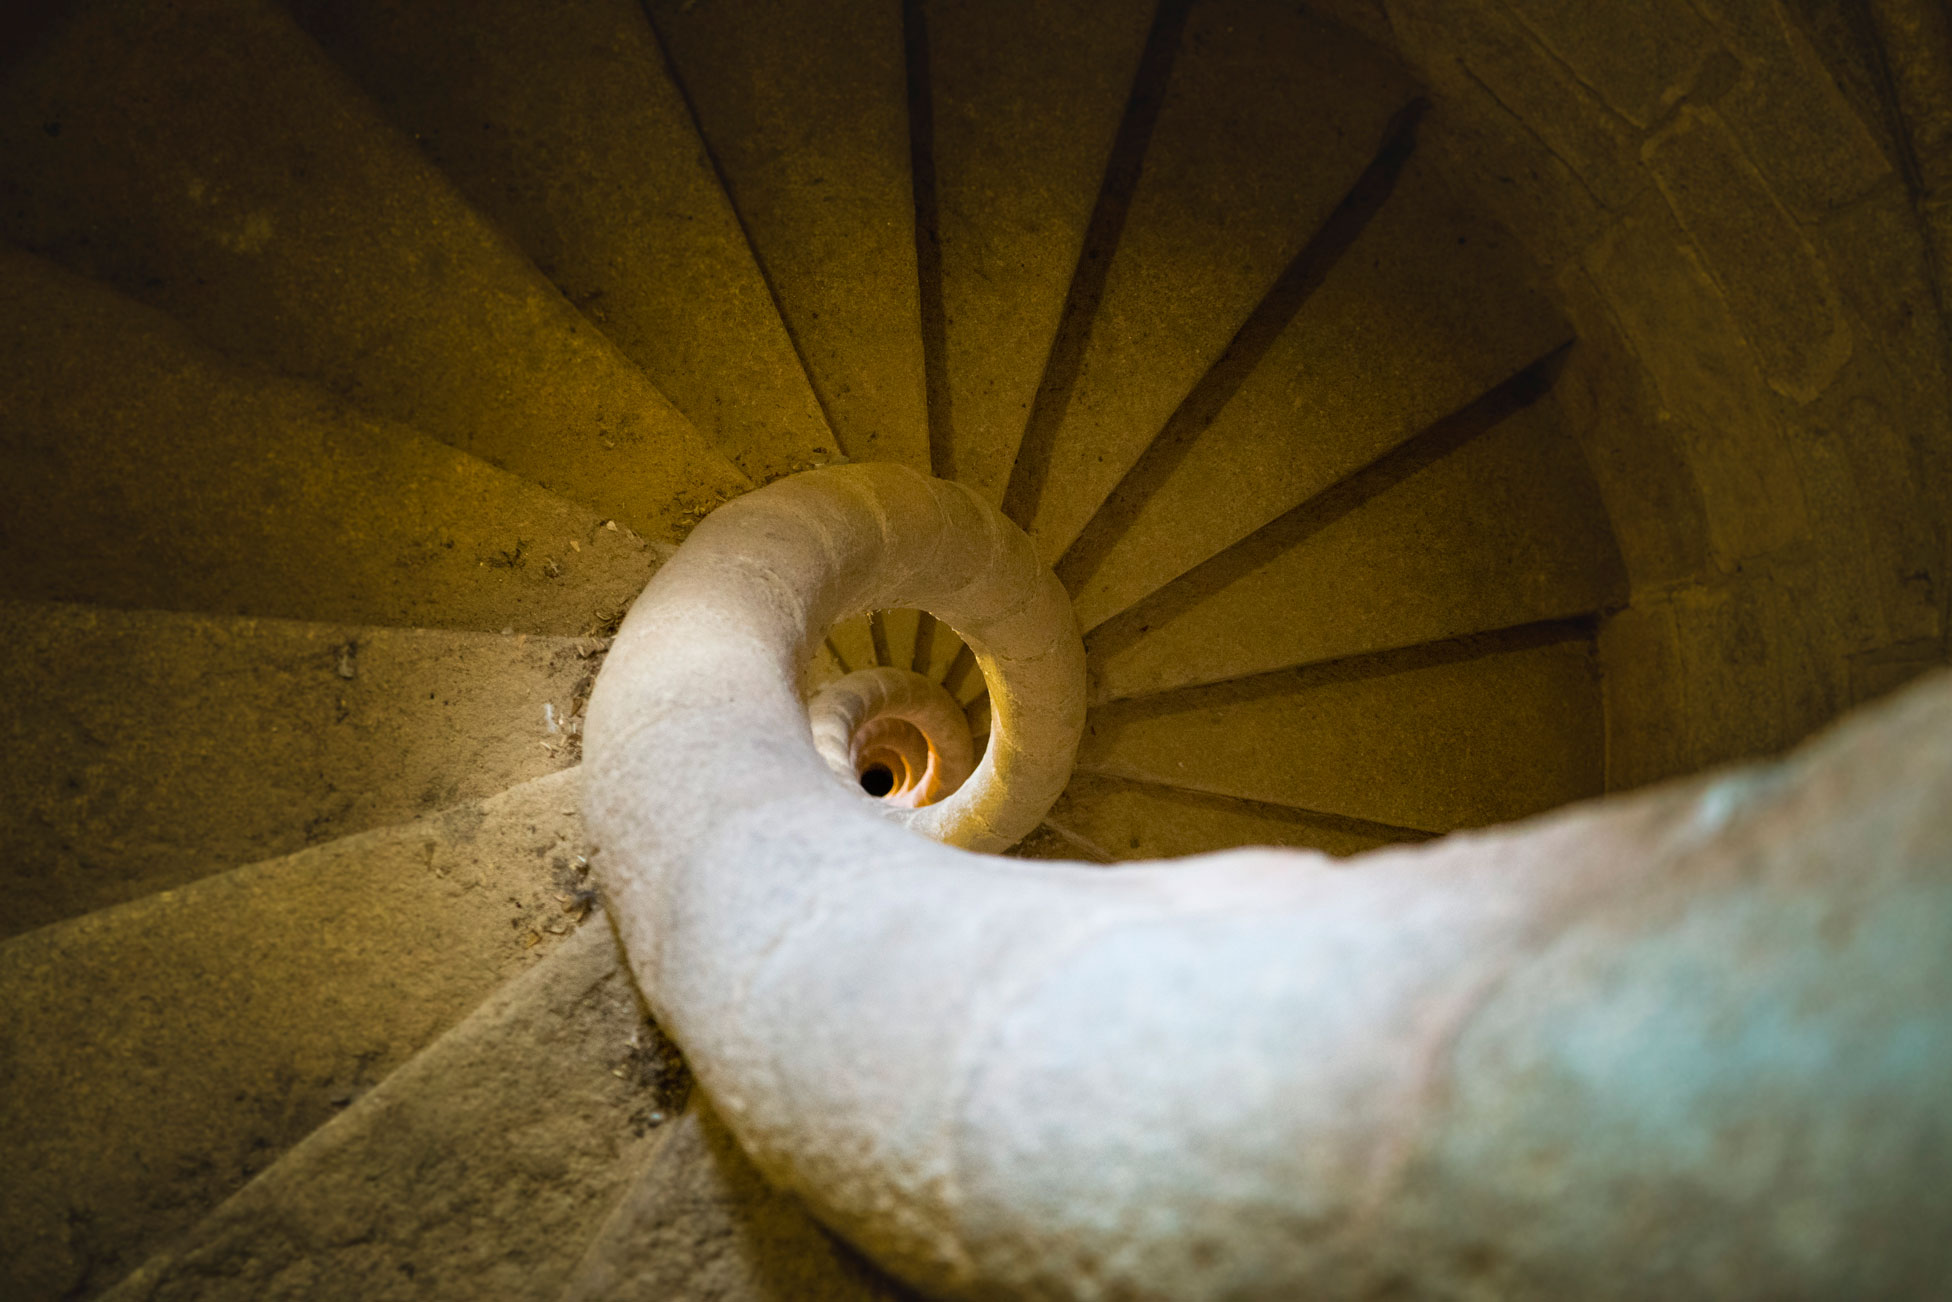 Staircase belfry